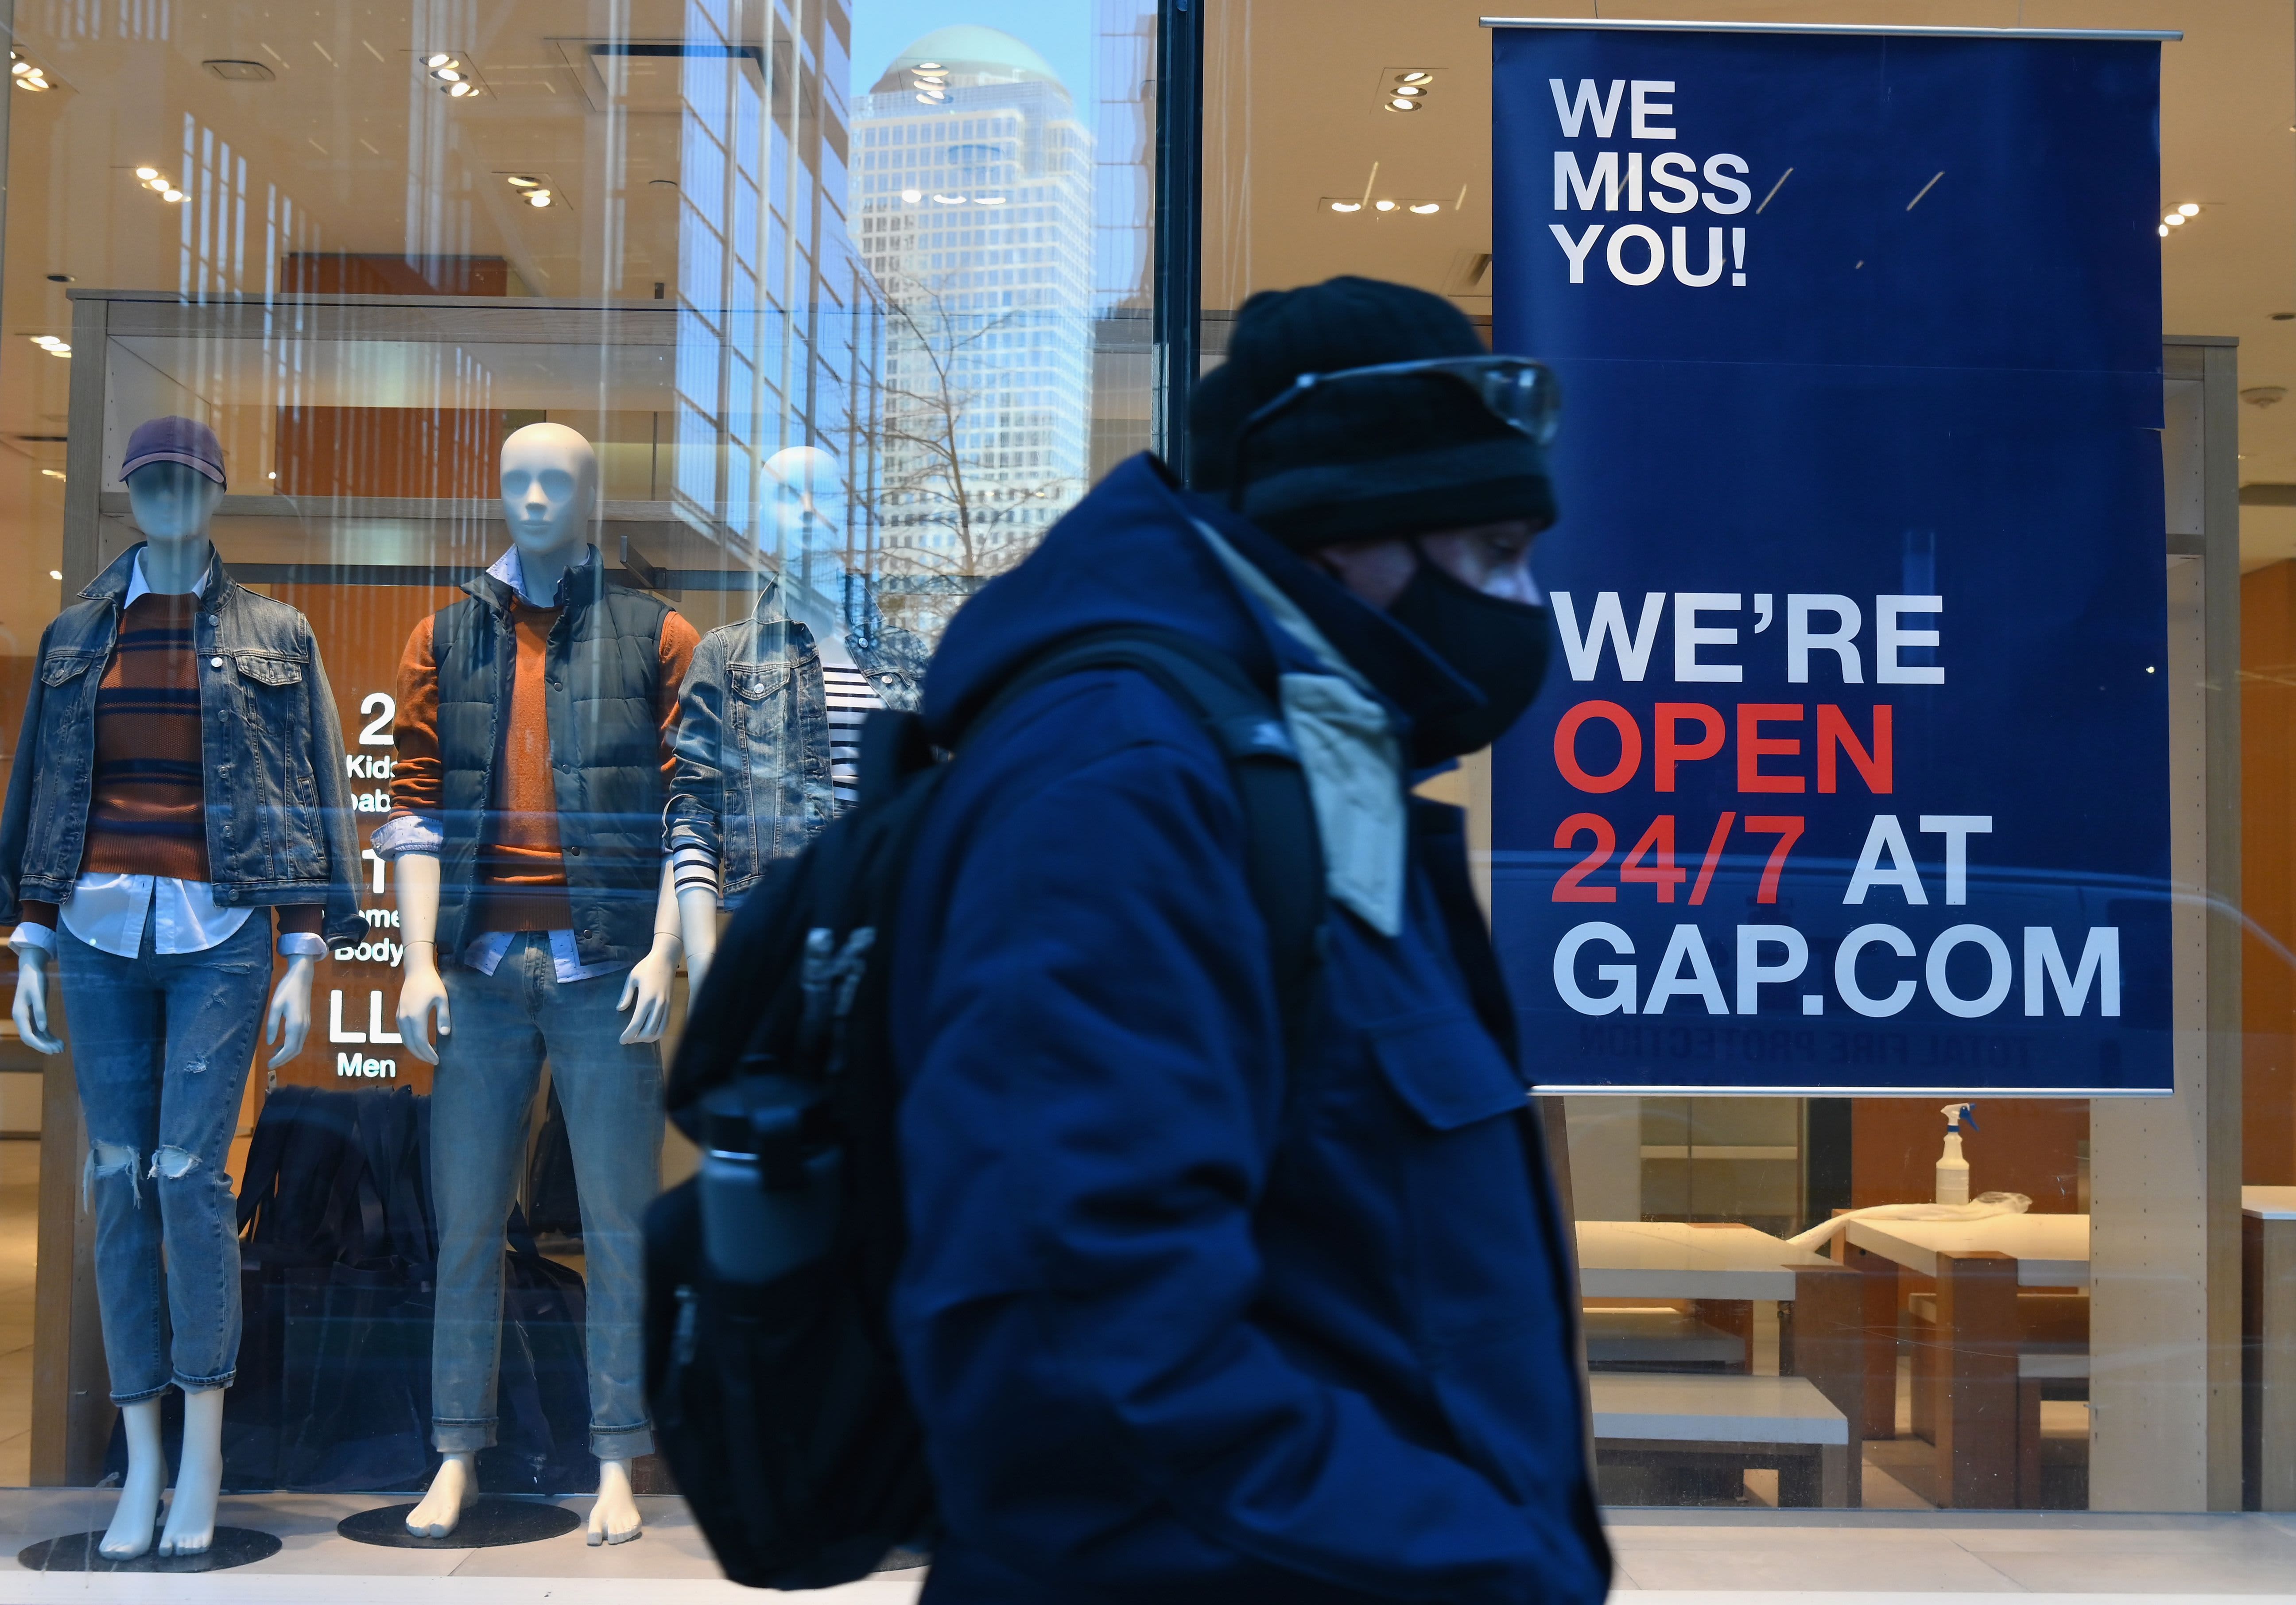 Gap (GPS) reports earnings for the fourth quarter of 2020, sales prospects in 2021